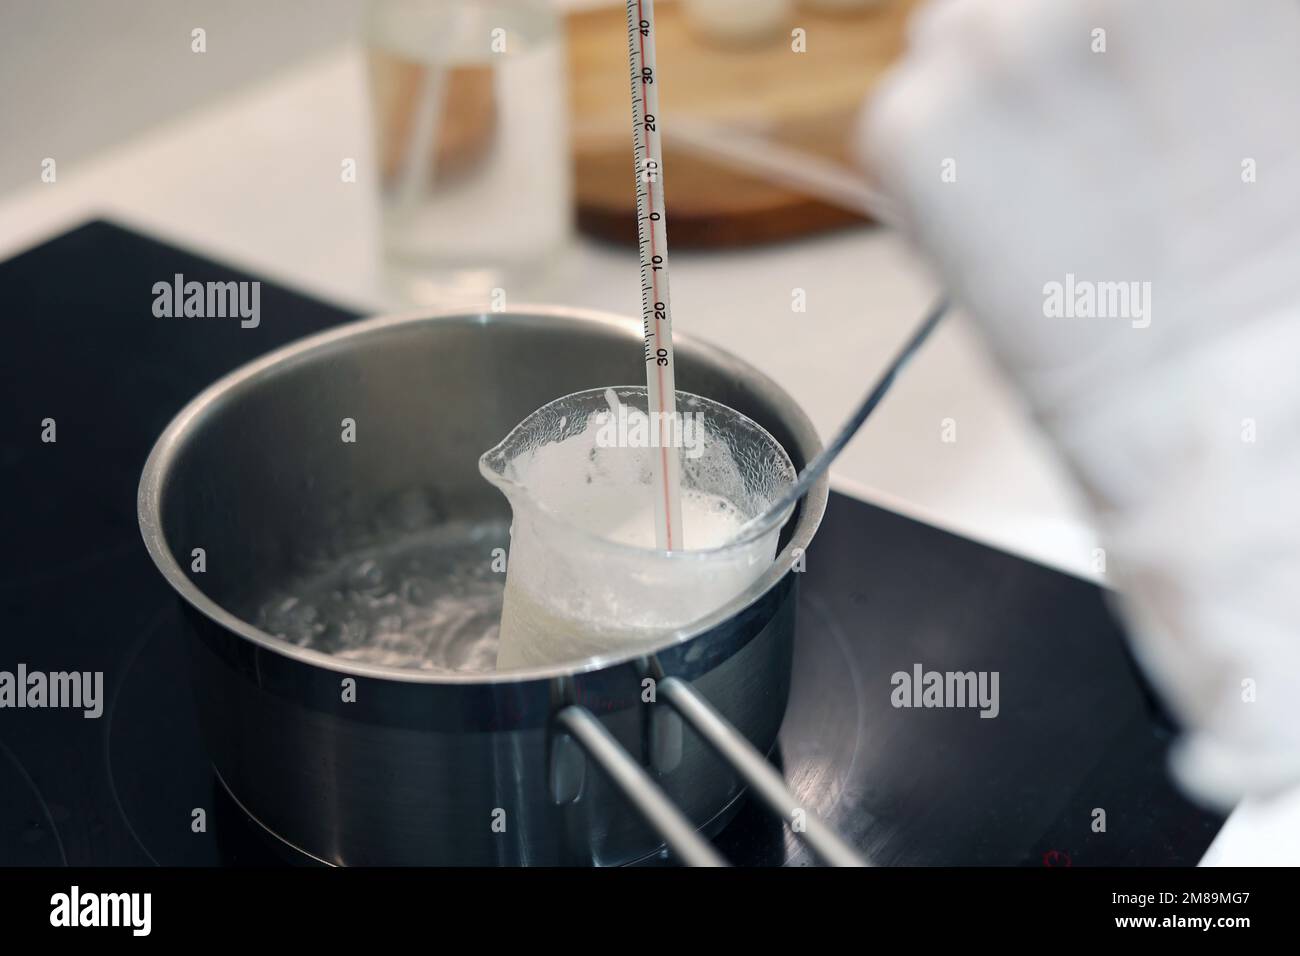 https://c8.alamy.com/comp/2M89MG7/heat-beaker-of-water-and-jojoba-oil-in-boiling-water-record-the-temperature-with-a-thermometer-2M89MG7.jpg